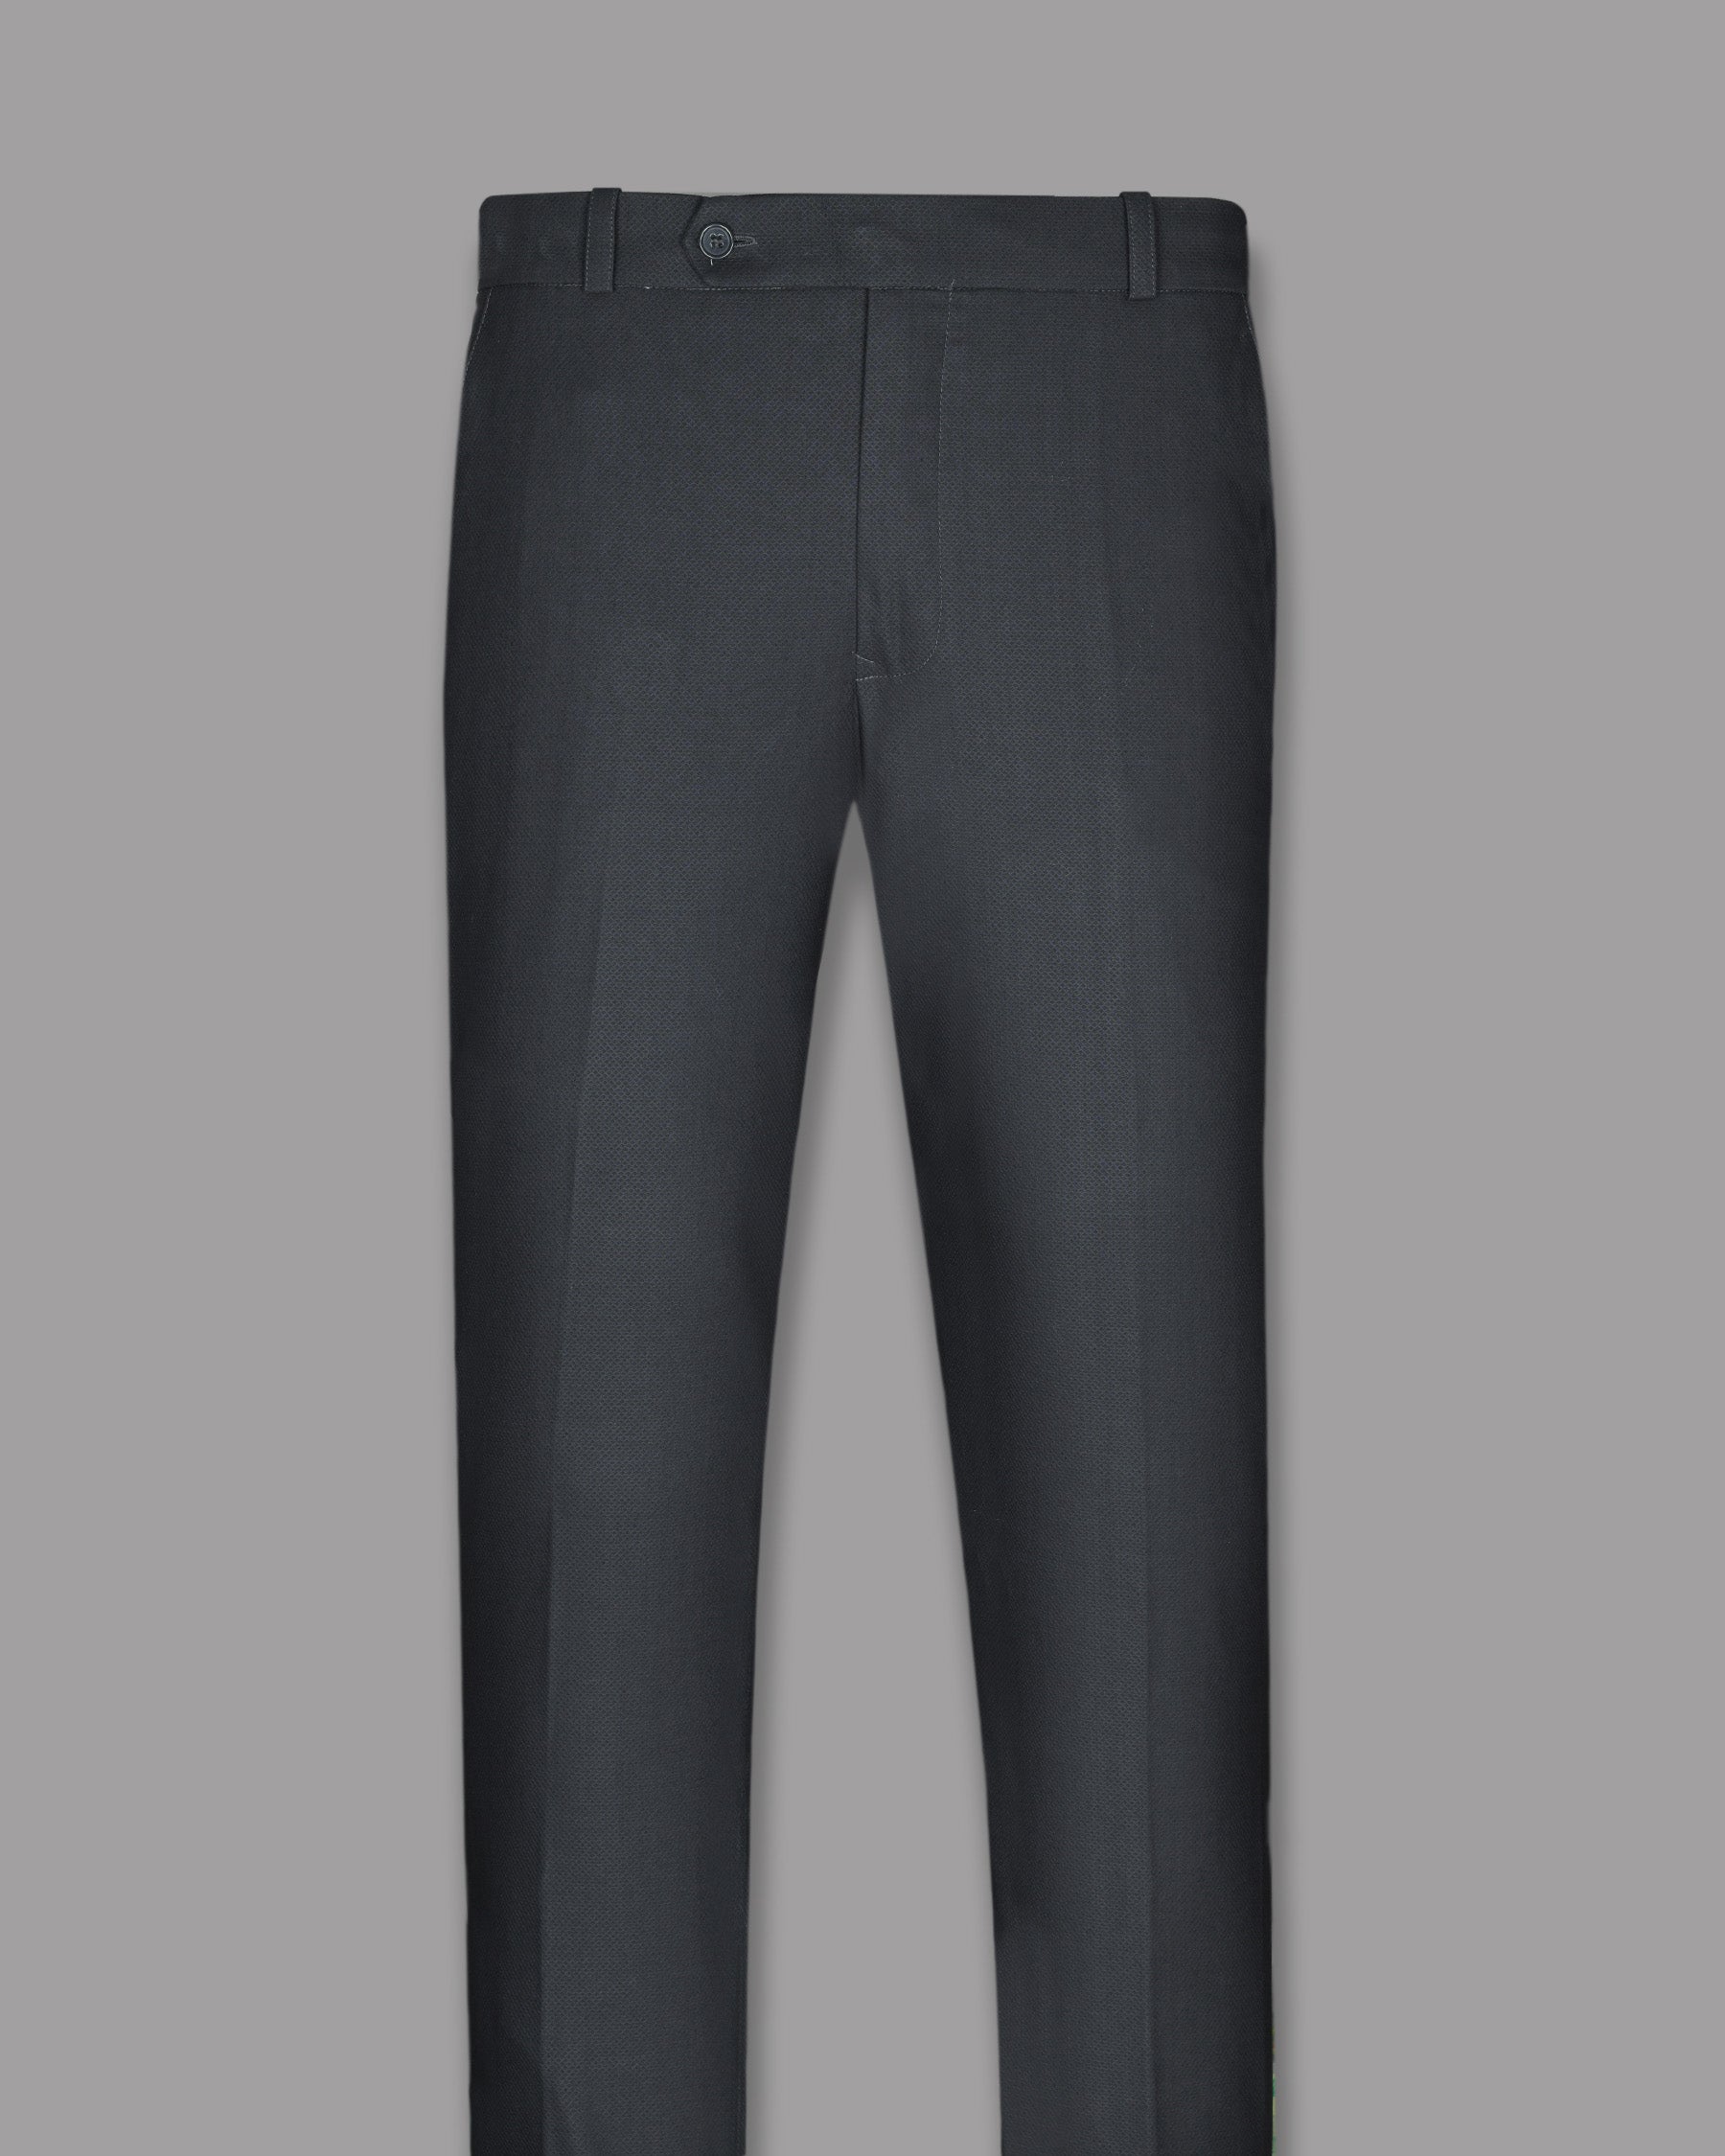 Anchor Grey Textured Premium Cotton Double Breasted Suit